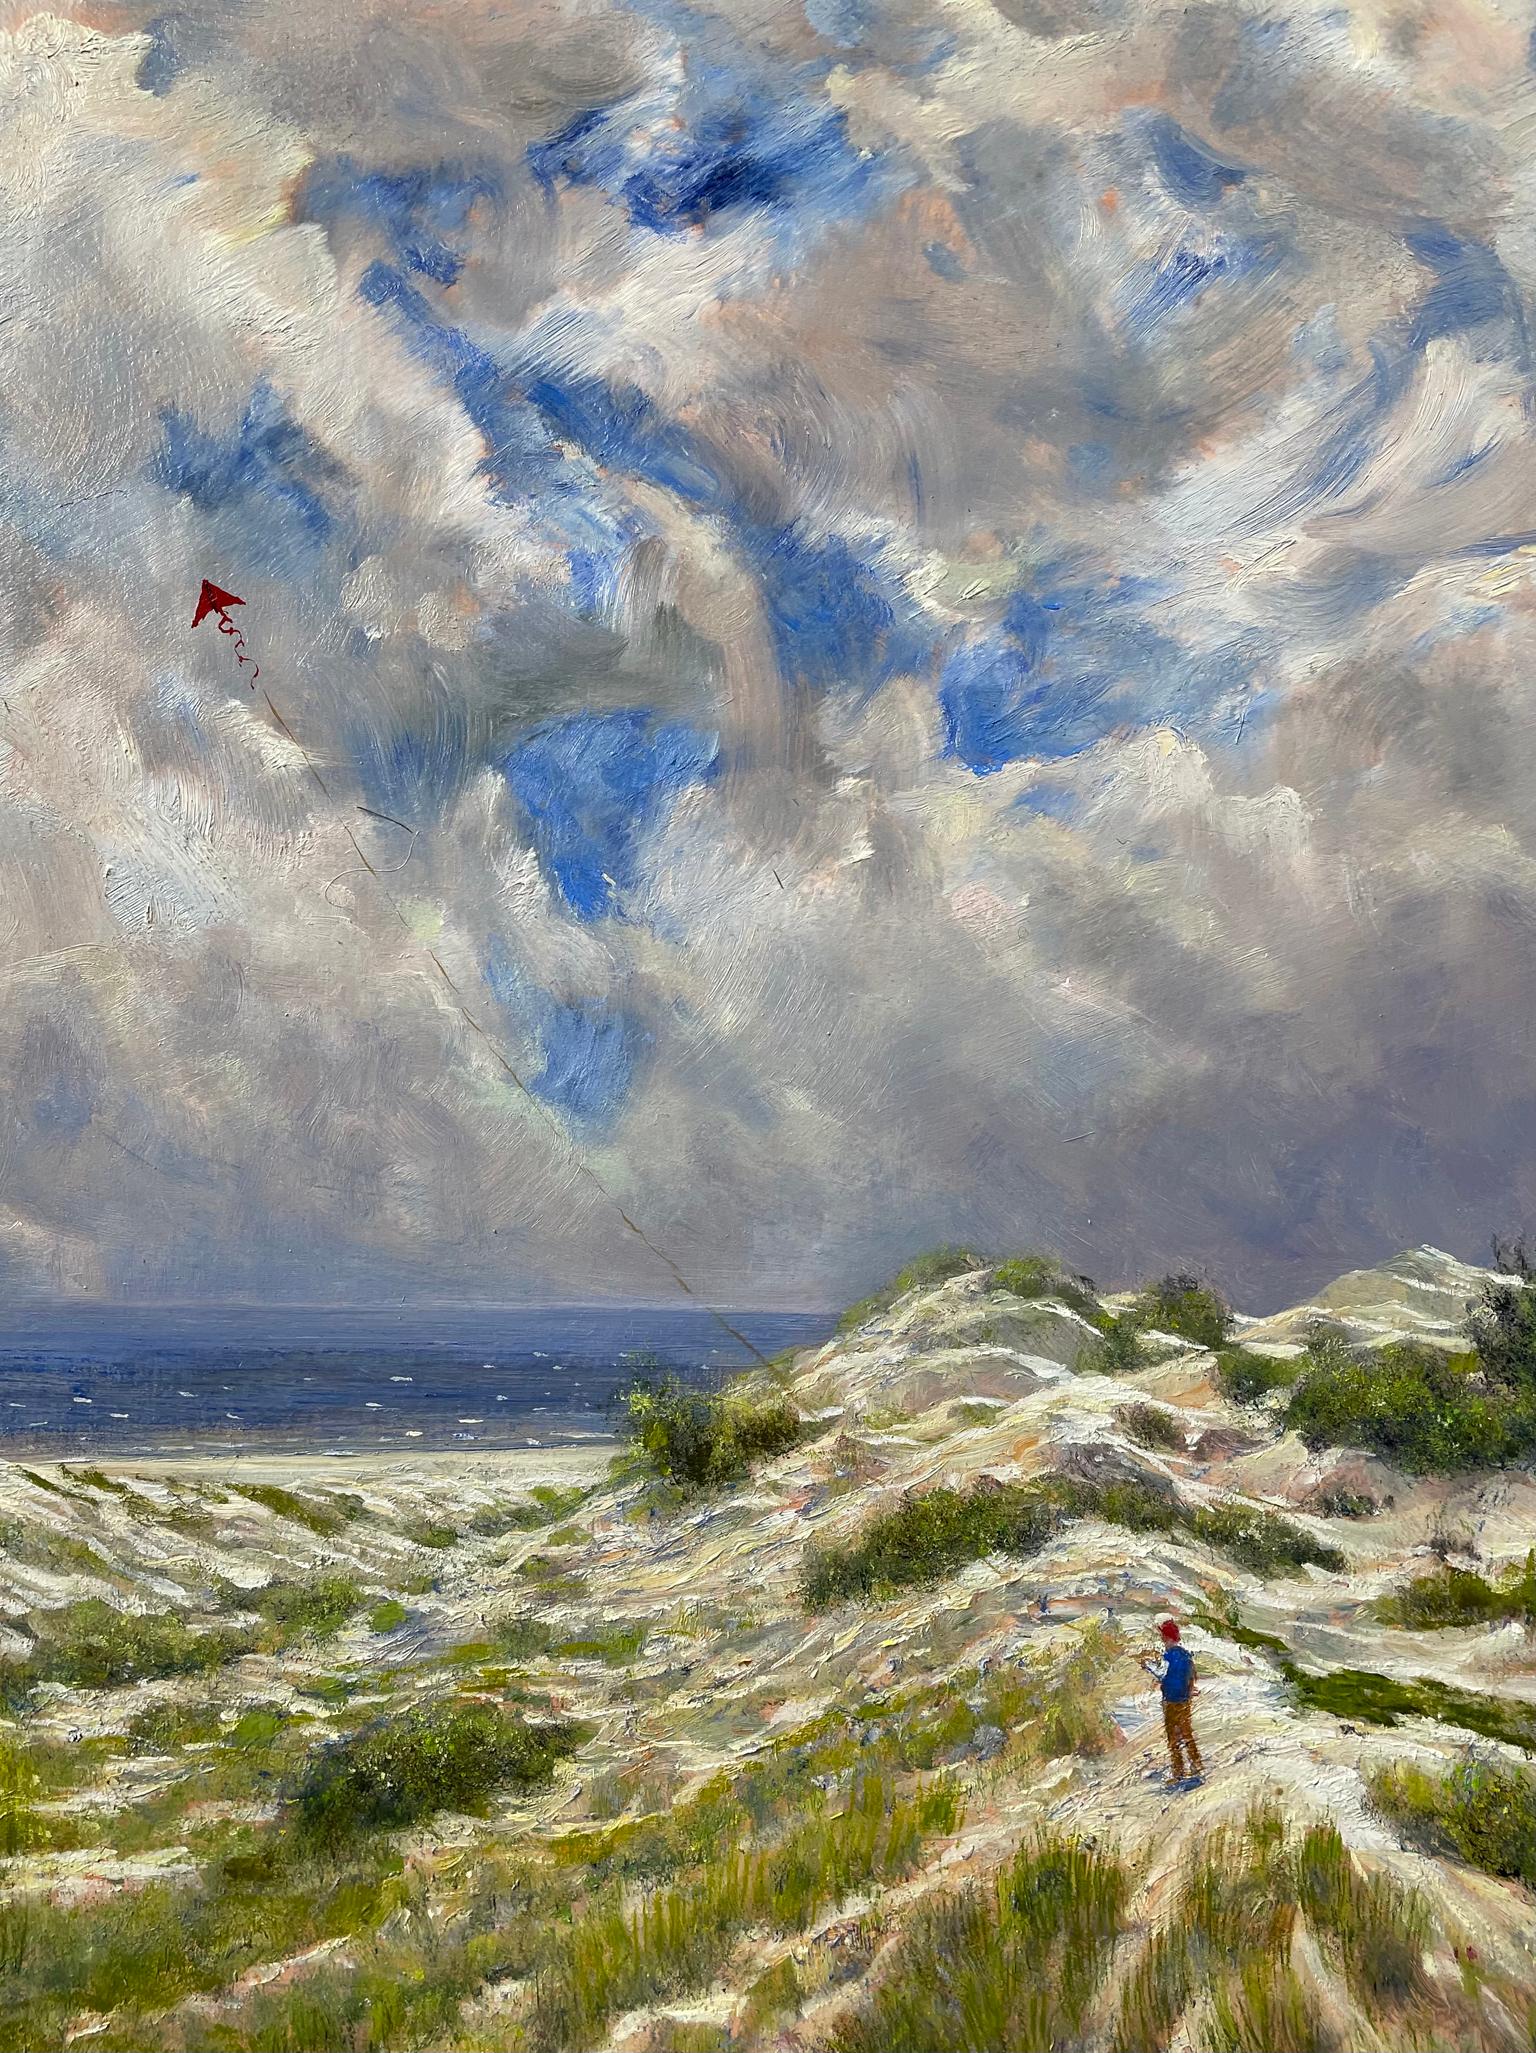 Flying a Red Kite on the Coastal Dunes of Long Island New York - Painting by Nicholas Oberling